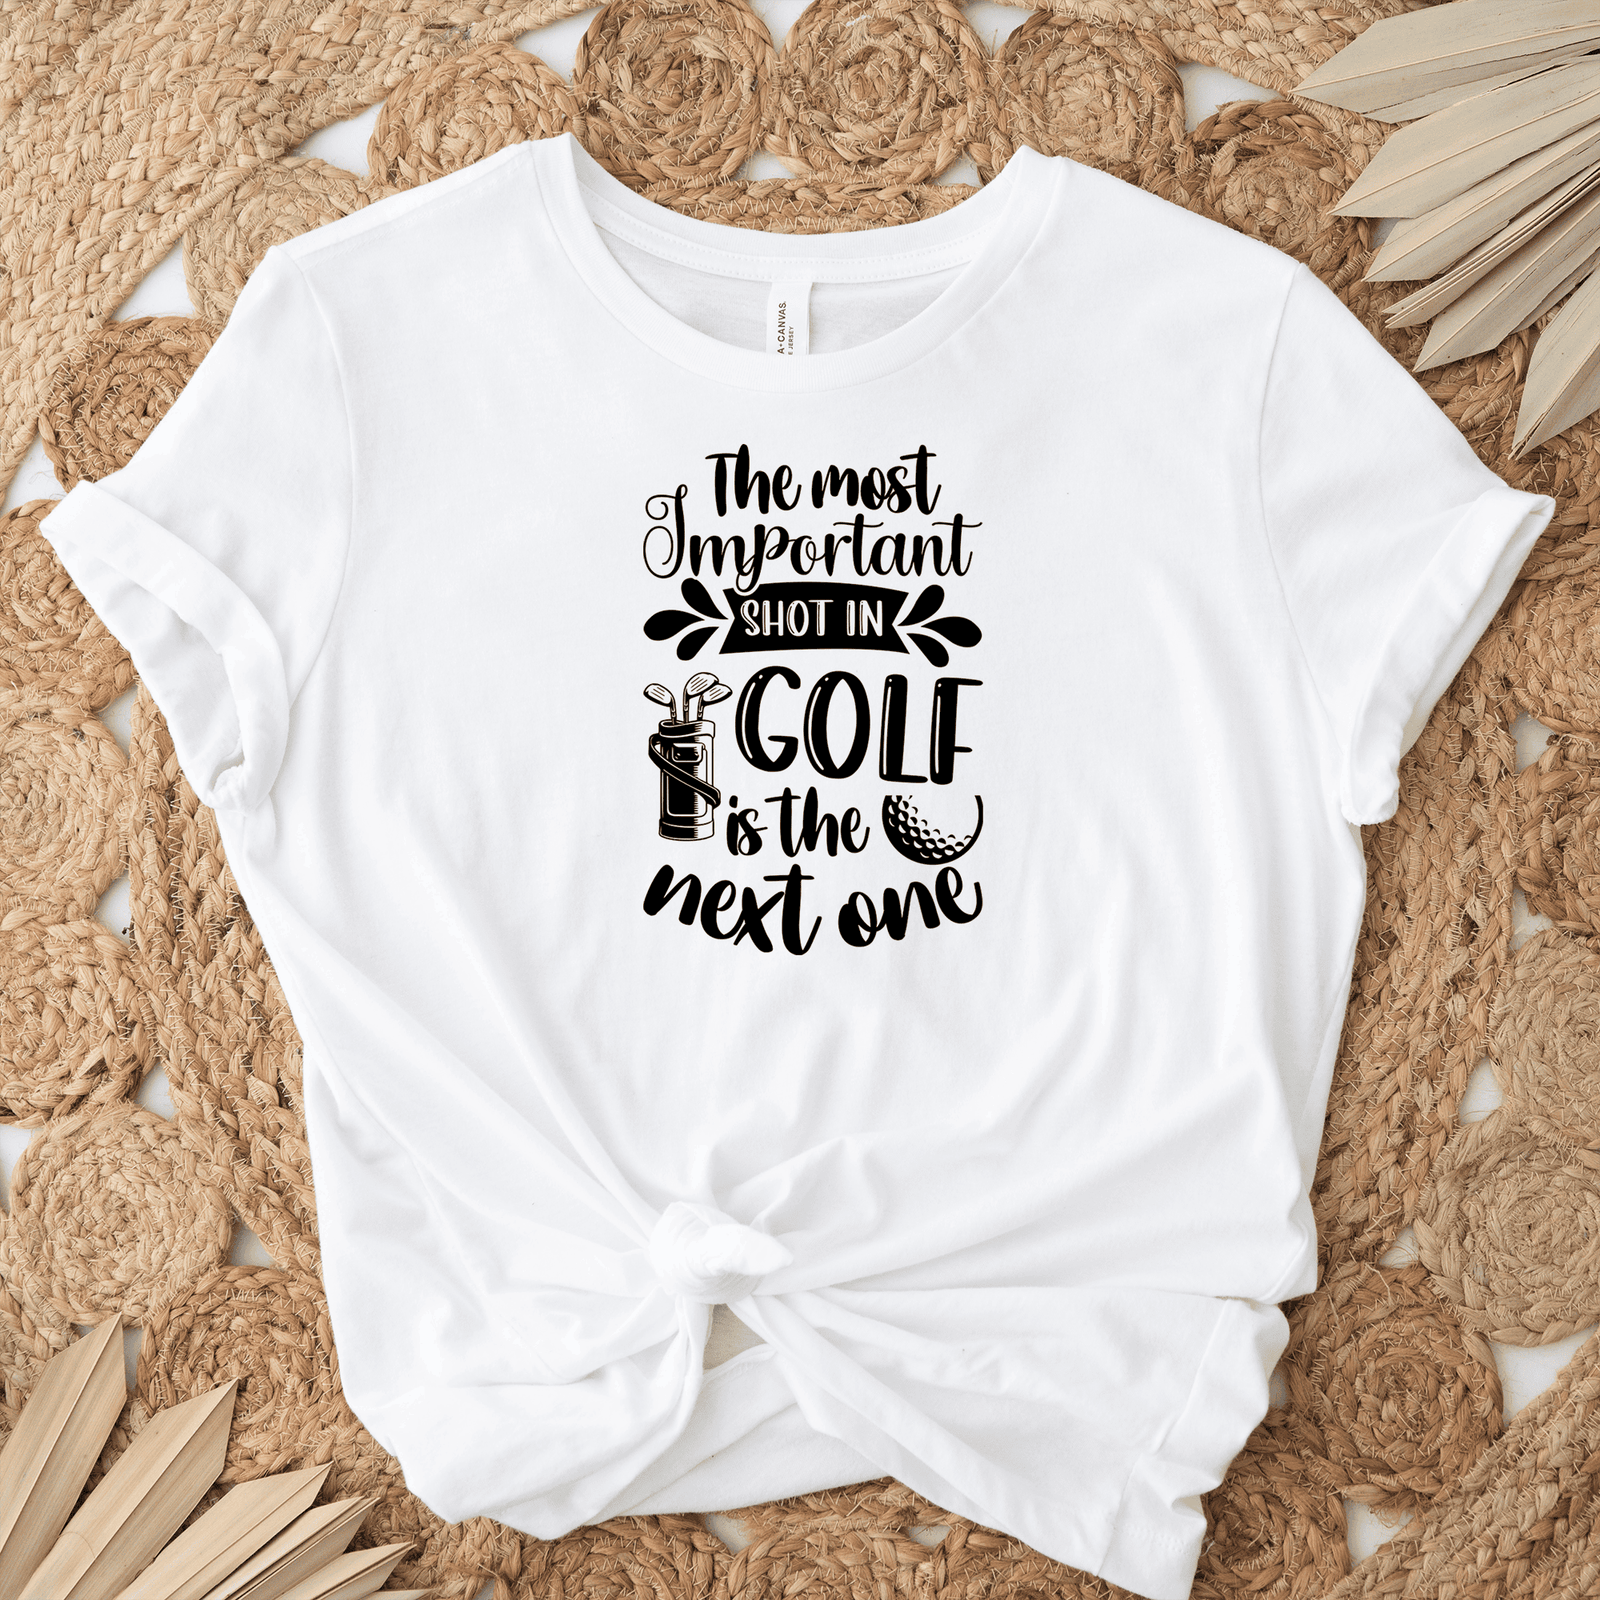 Womens White T Shirt with Most-Important-Shot design